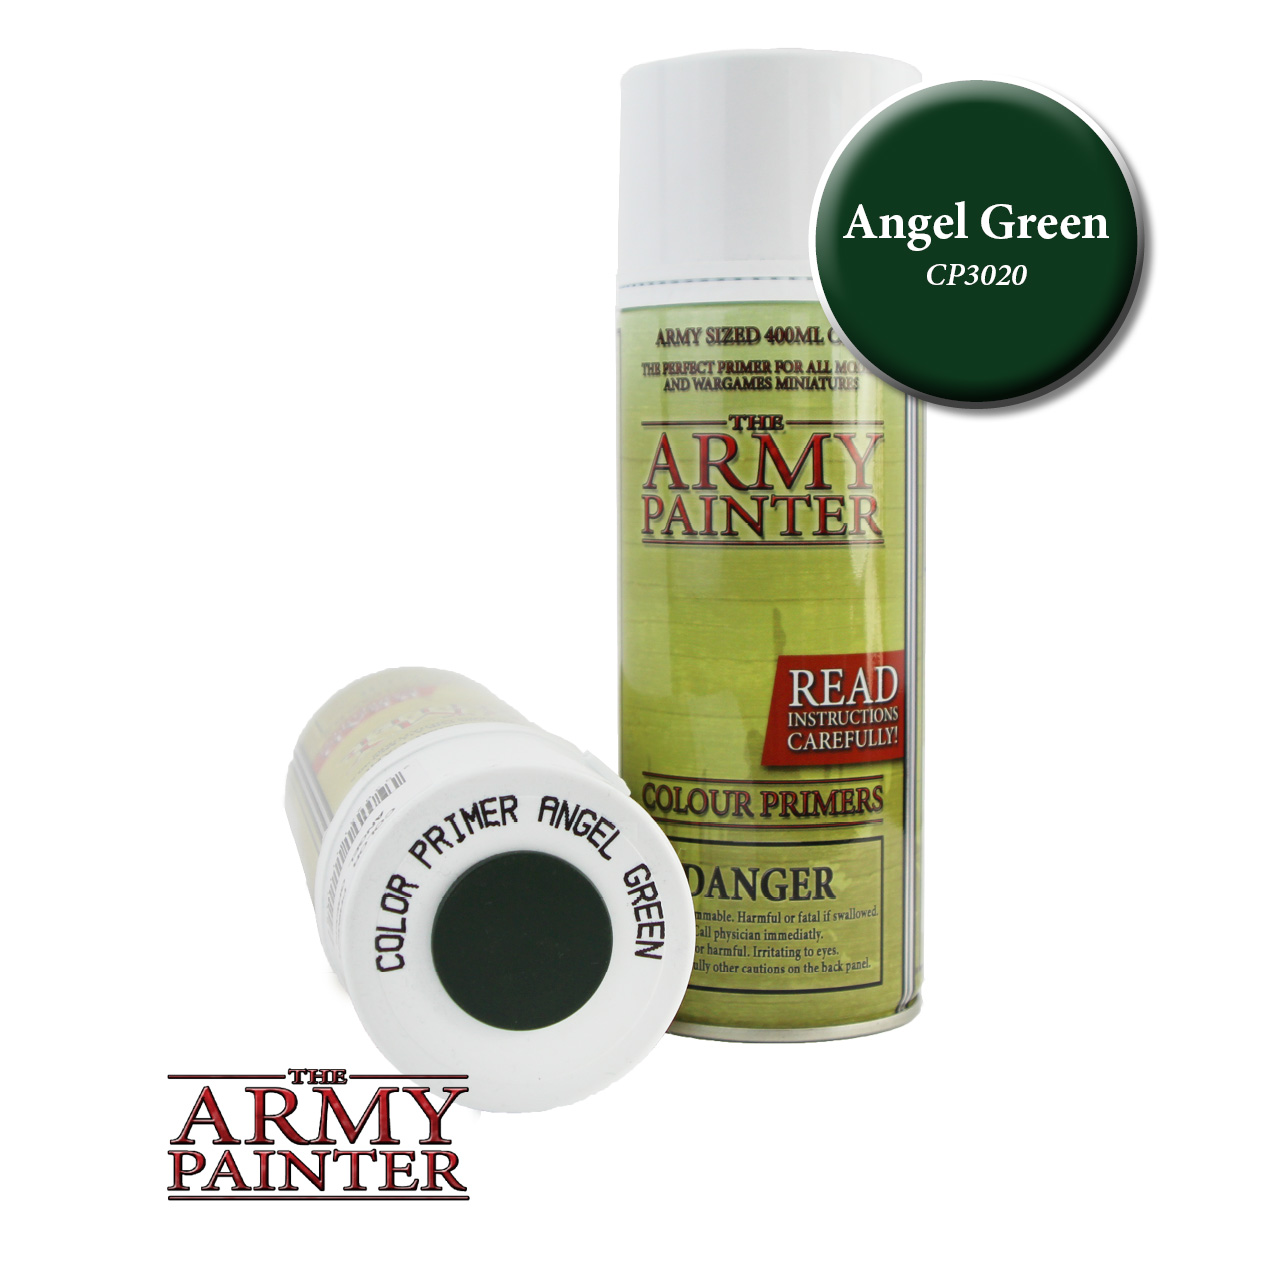 43020 CP3020S ARMY PAINTER SPRAY ANGEL GREEN